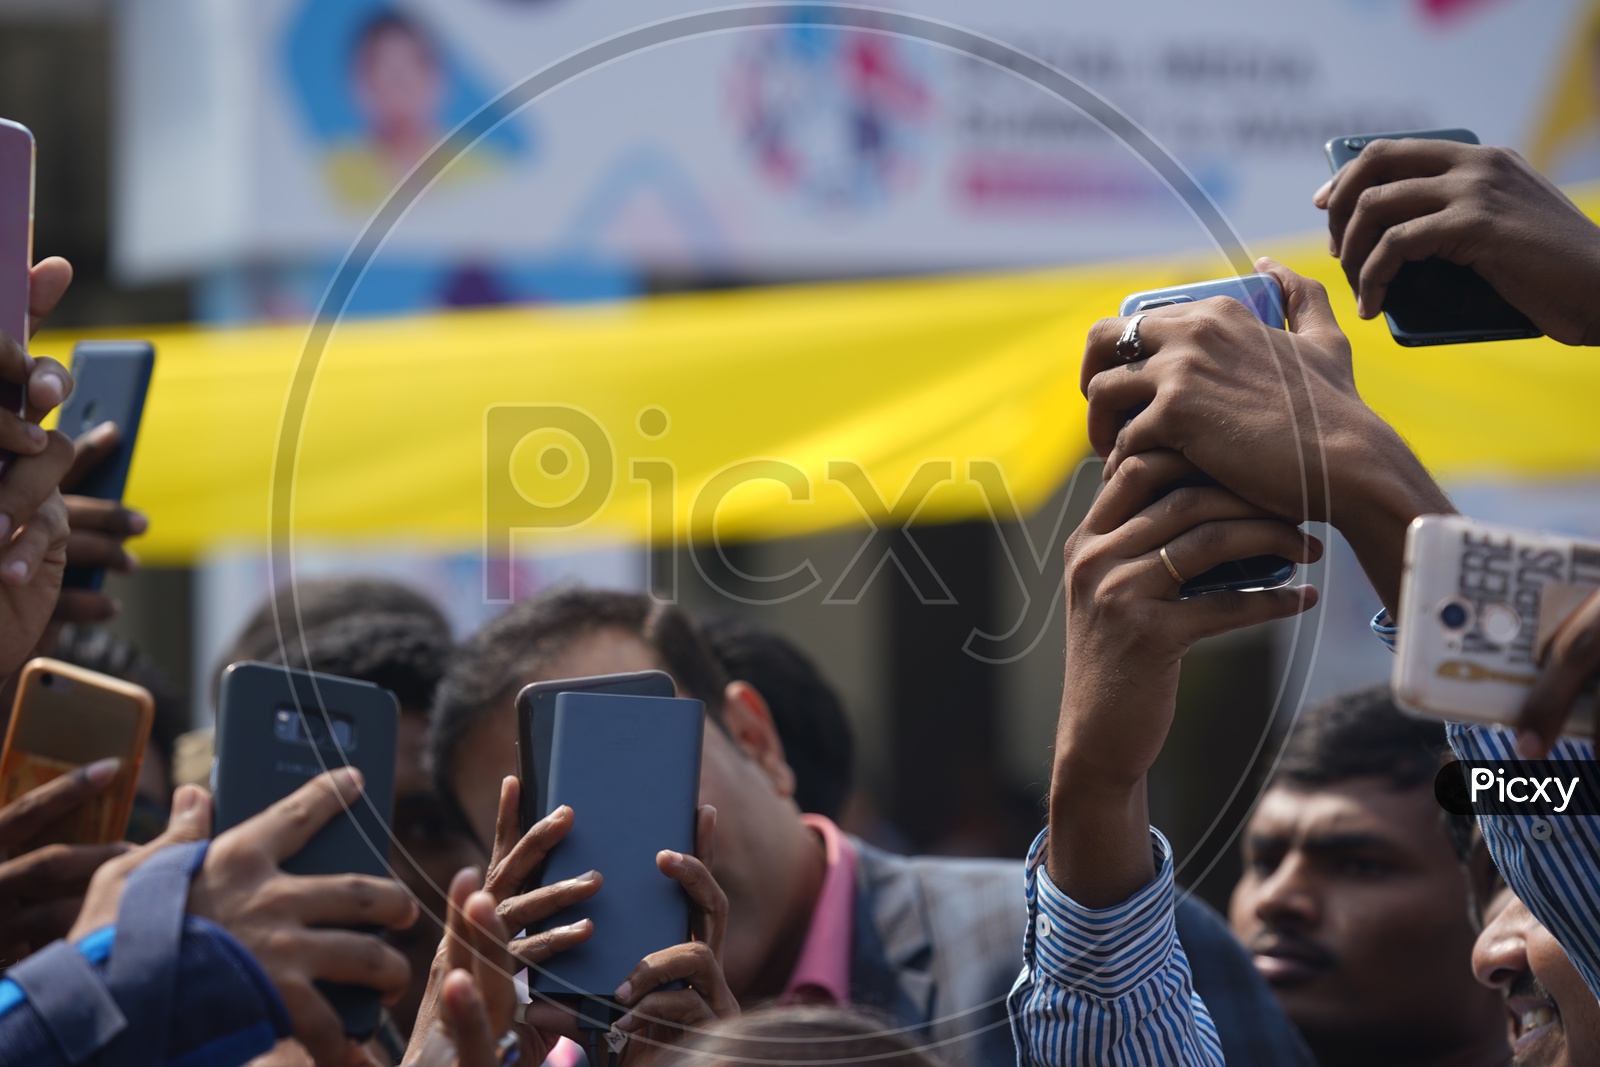 Students take selfies with former Indian cricketer V V S Laxman while he arrives to address the Social Media Summit in Amaravati 2018